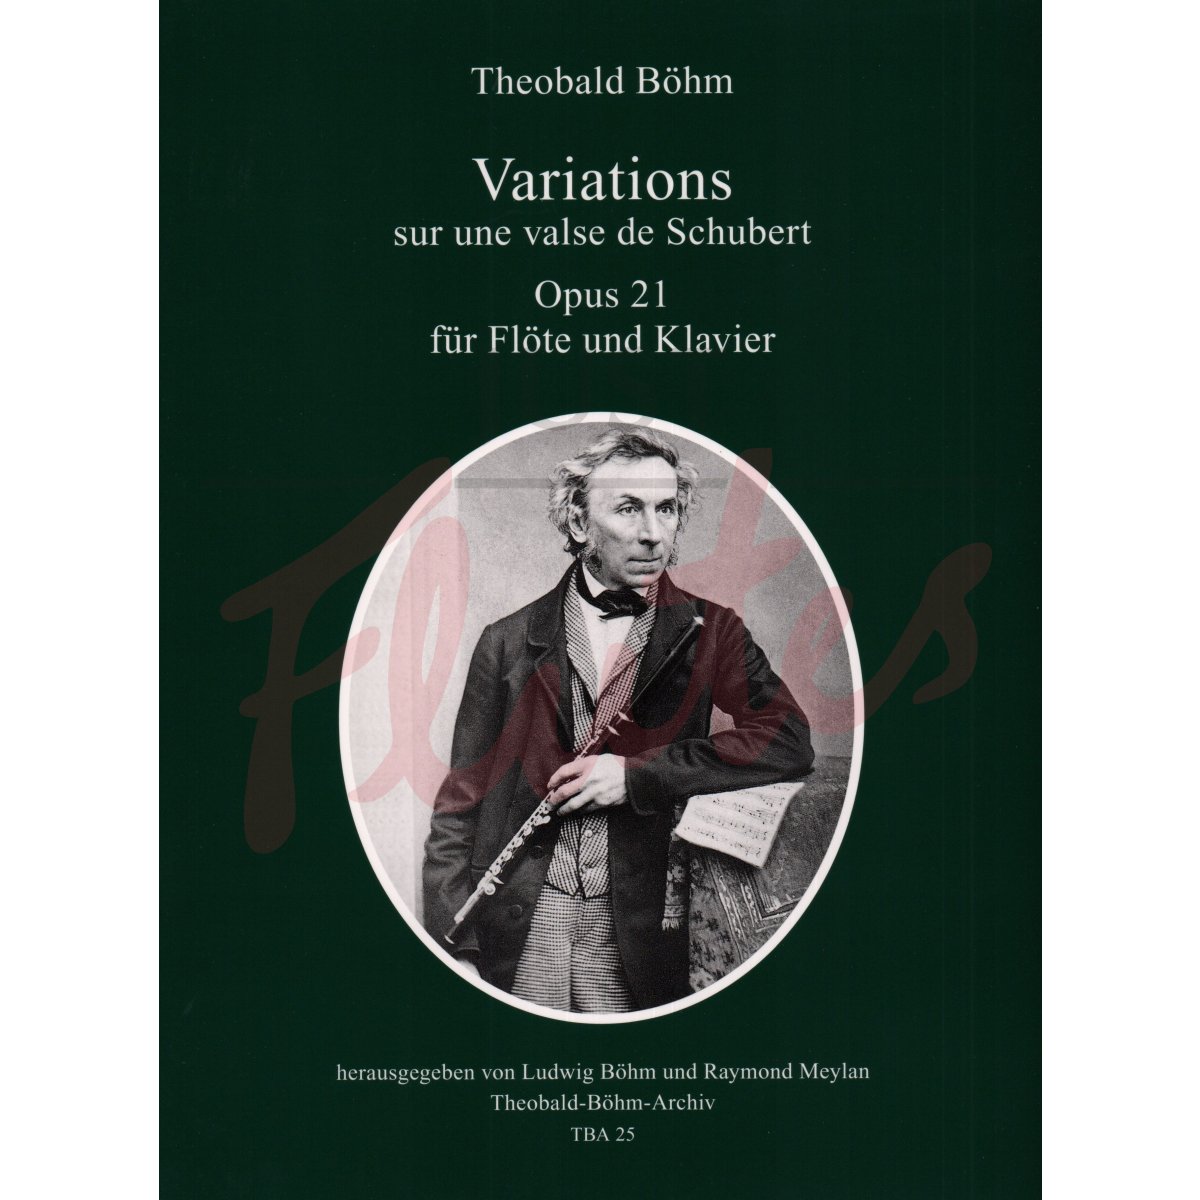 Variations on a Schubert Waltz for Flute and Piano